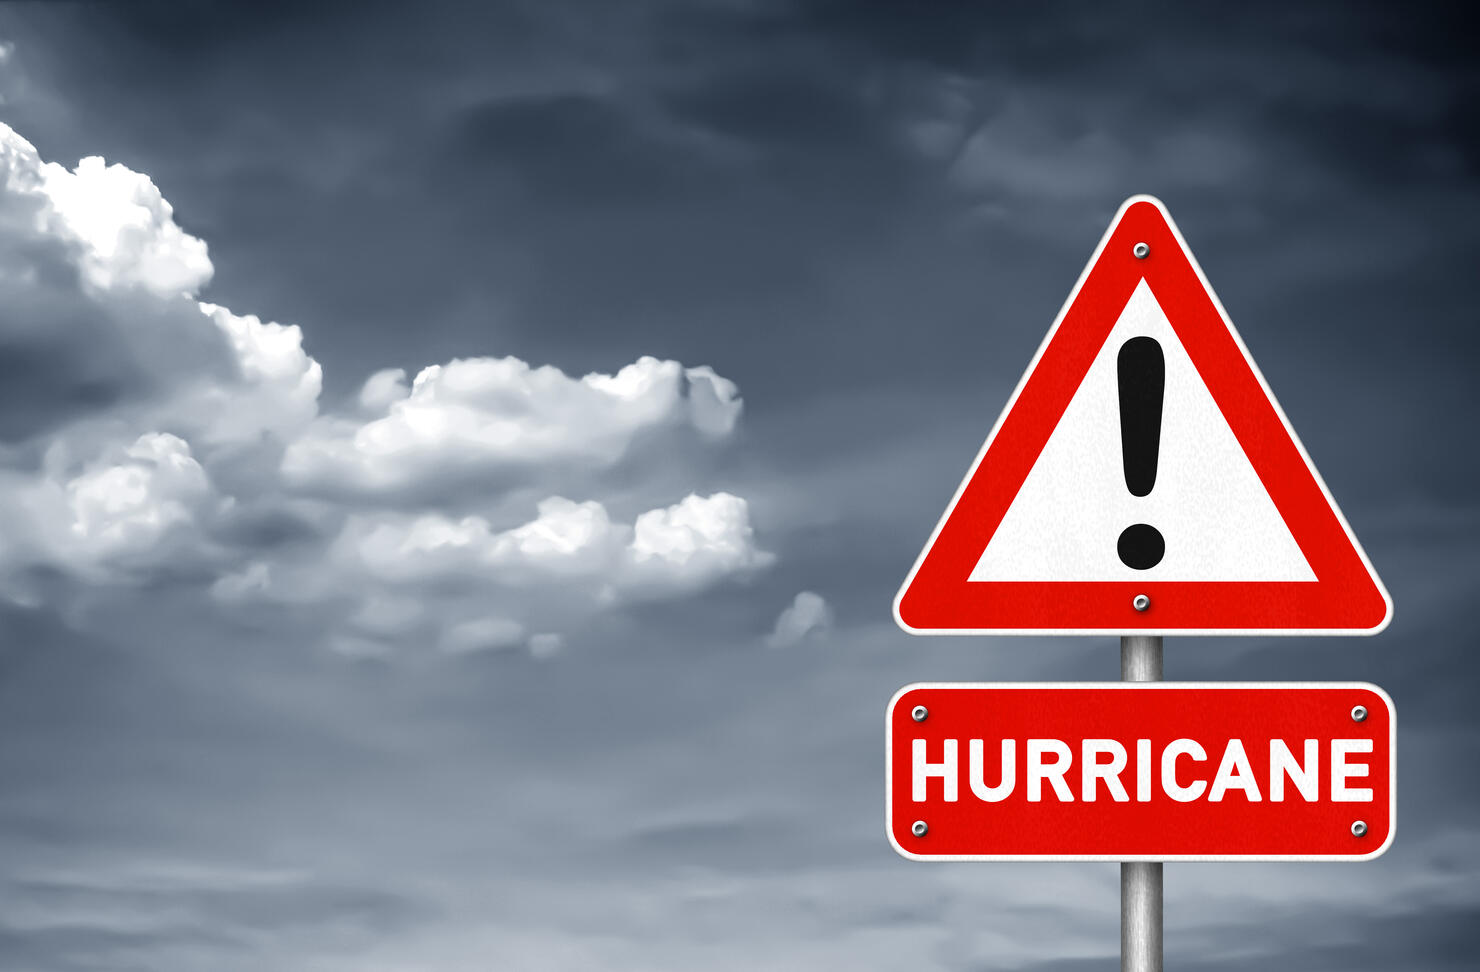 Hurricane attention road sign